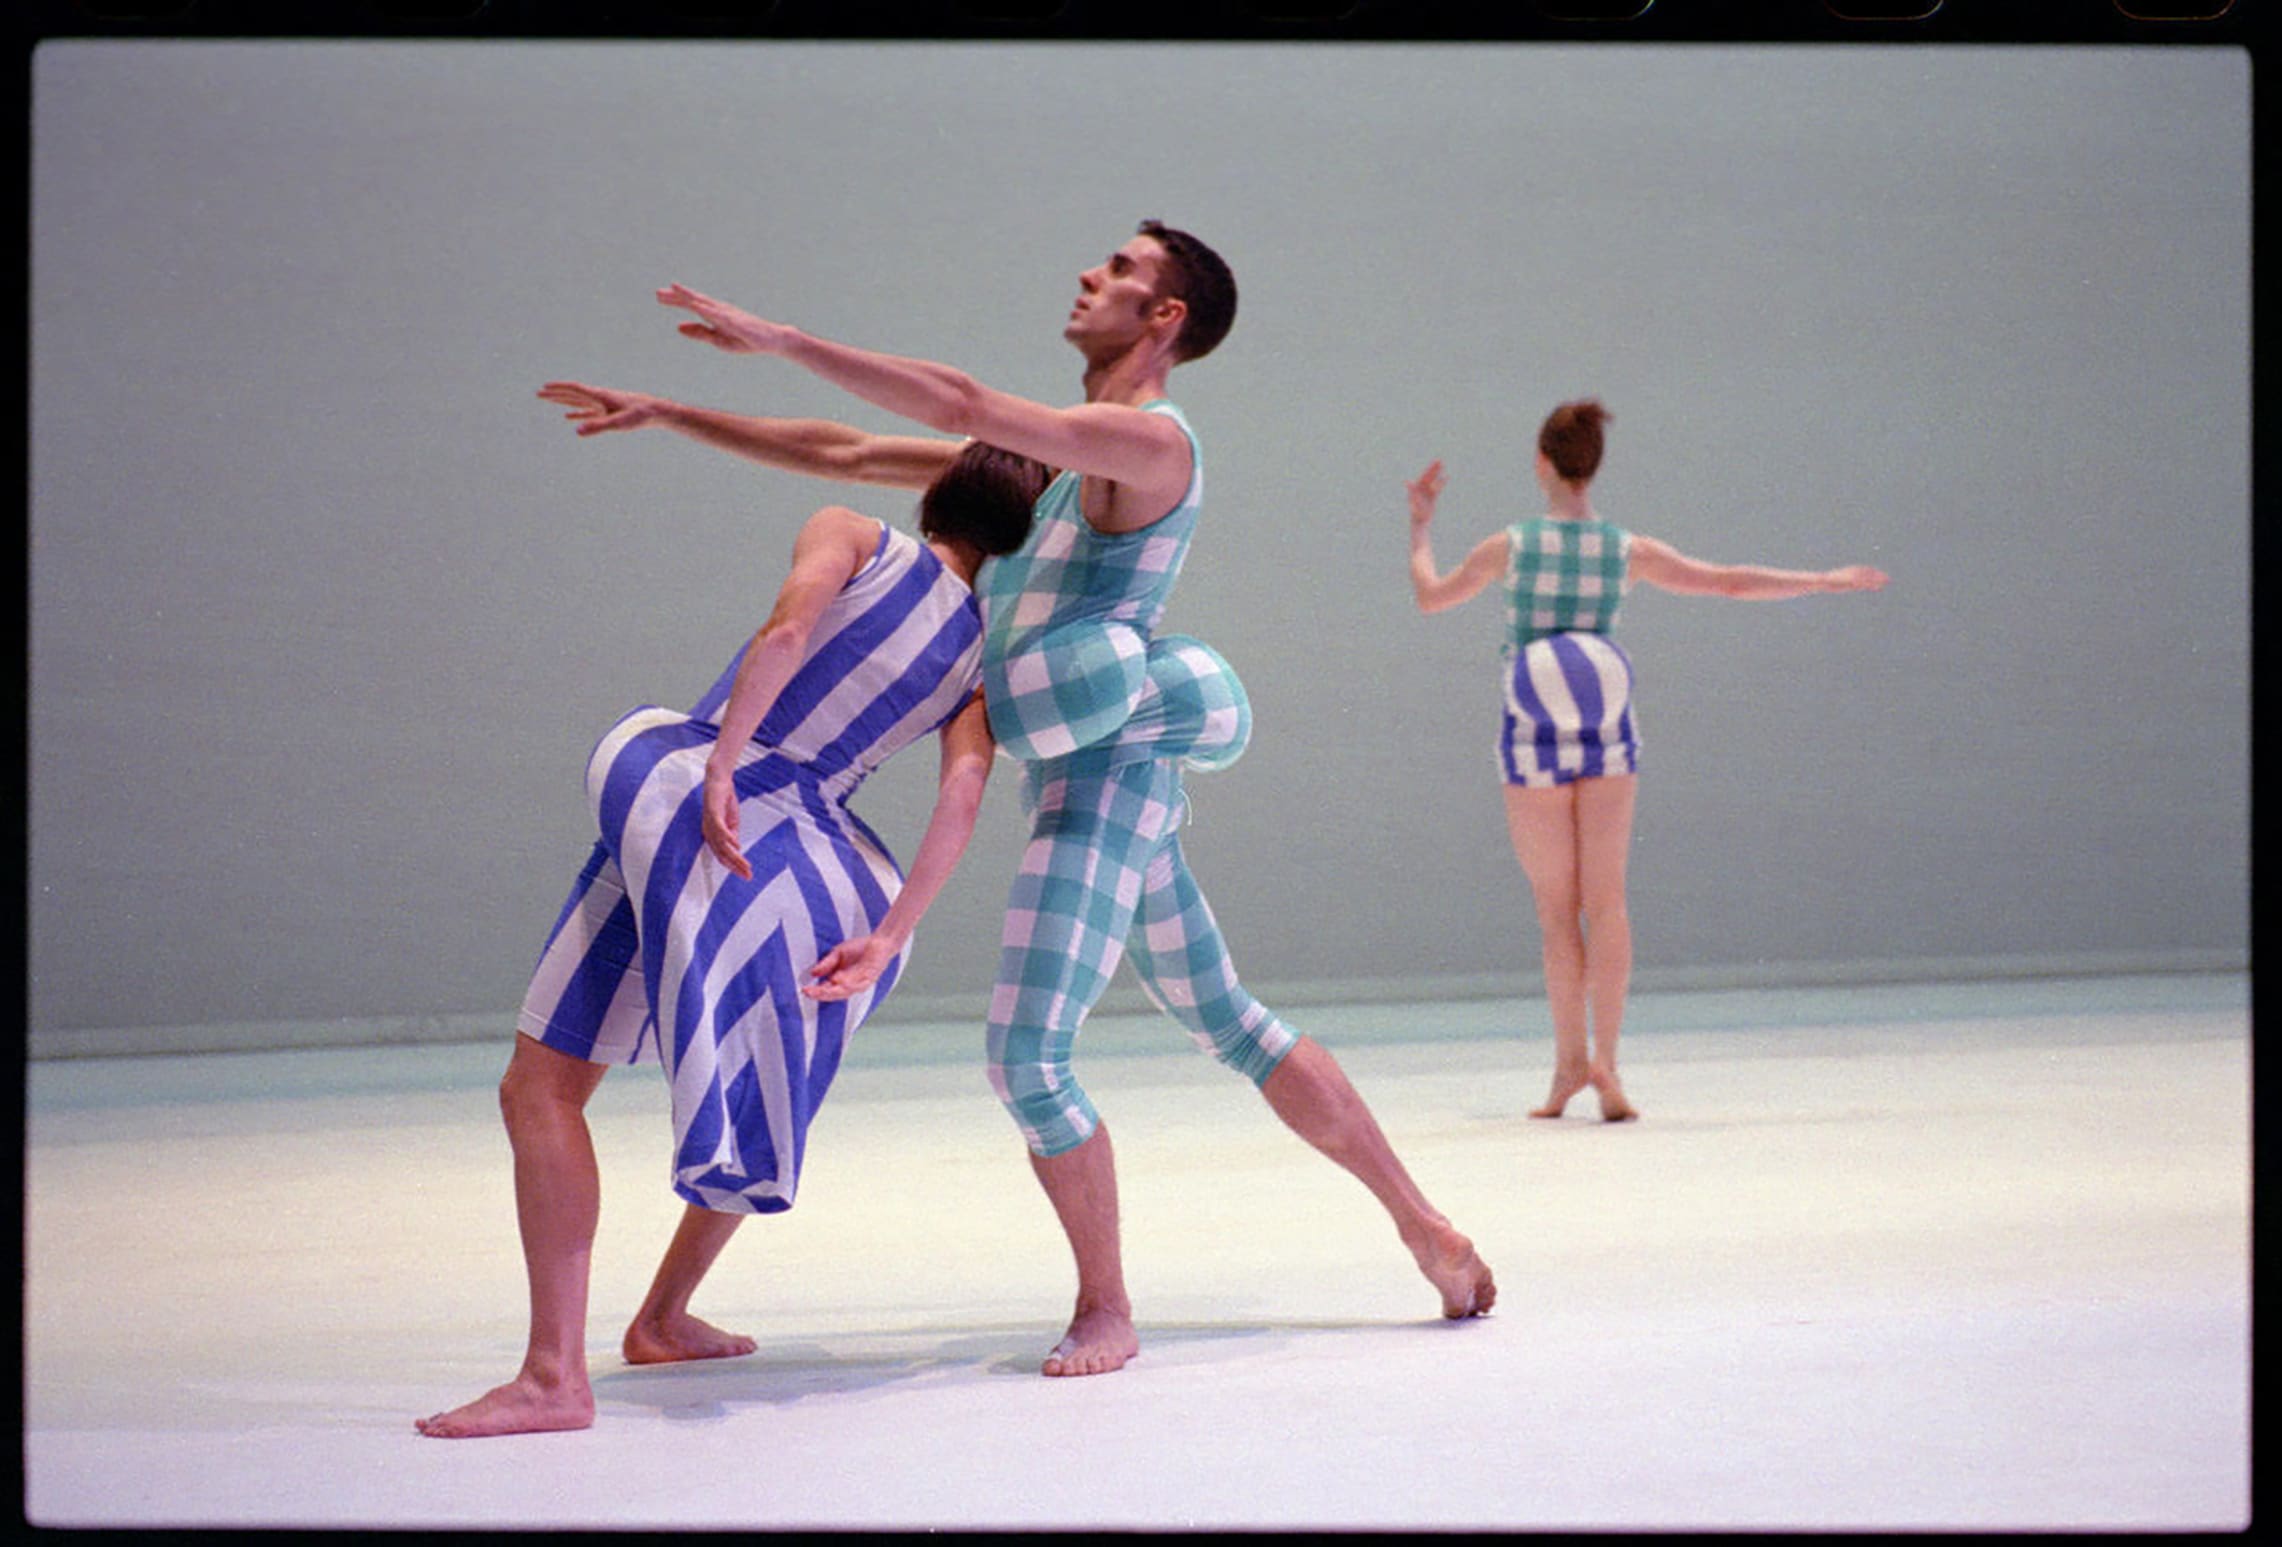 Jean Freebury, Matthew Mohr and Holley Farmer of the Merce Cunningham Dance Company in Scenario. Costumes by Rei Kawakubo. Portrait by © 1997 Timothy Greenfield-Sanders. All Rights Reserved. Courtesy of the photographer.